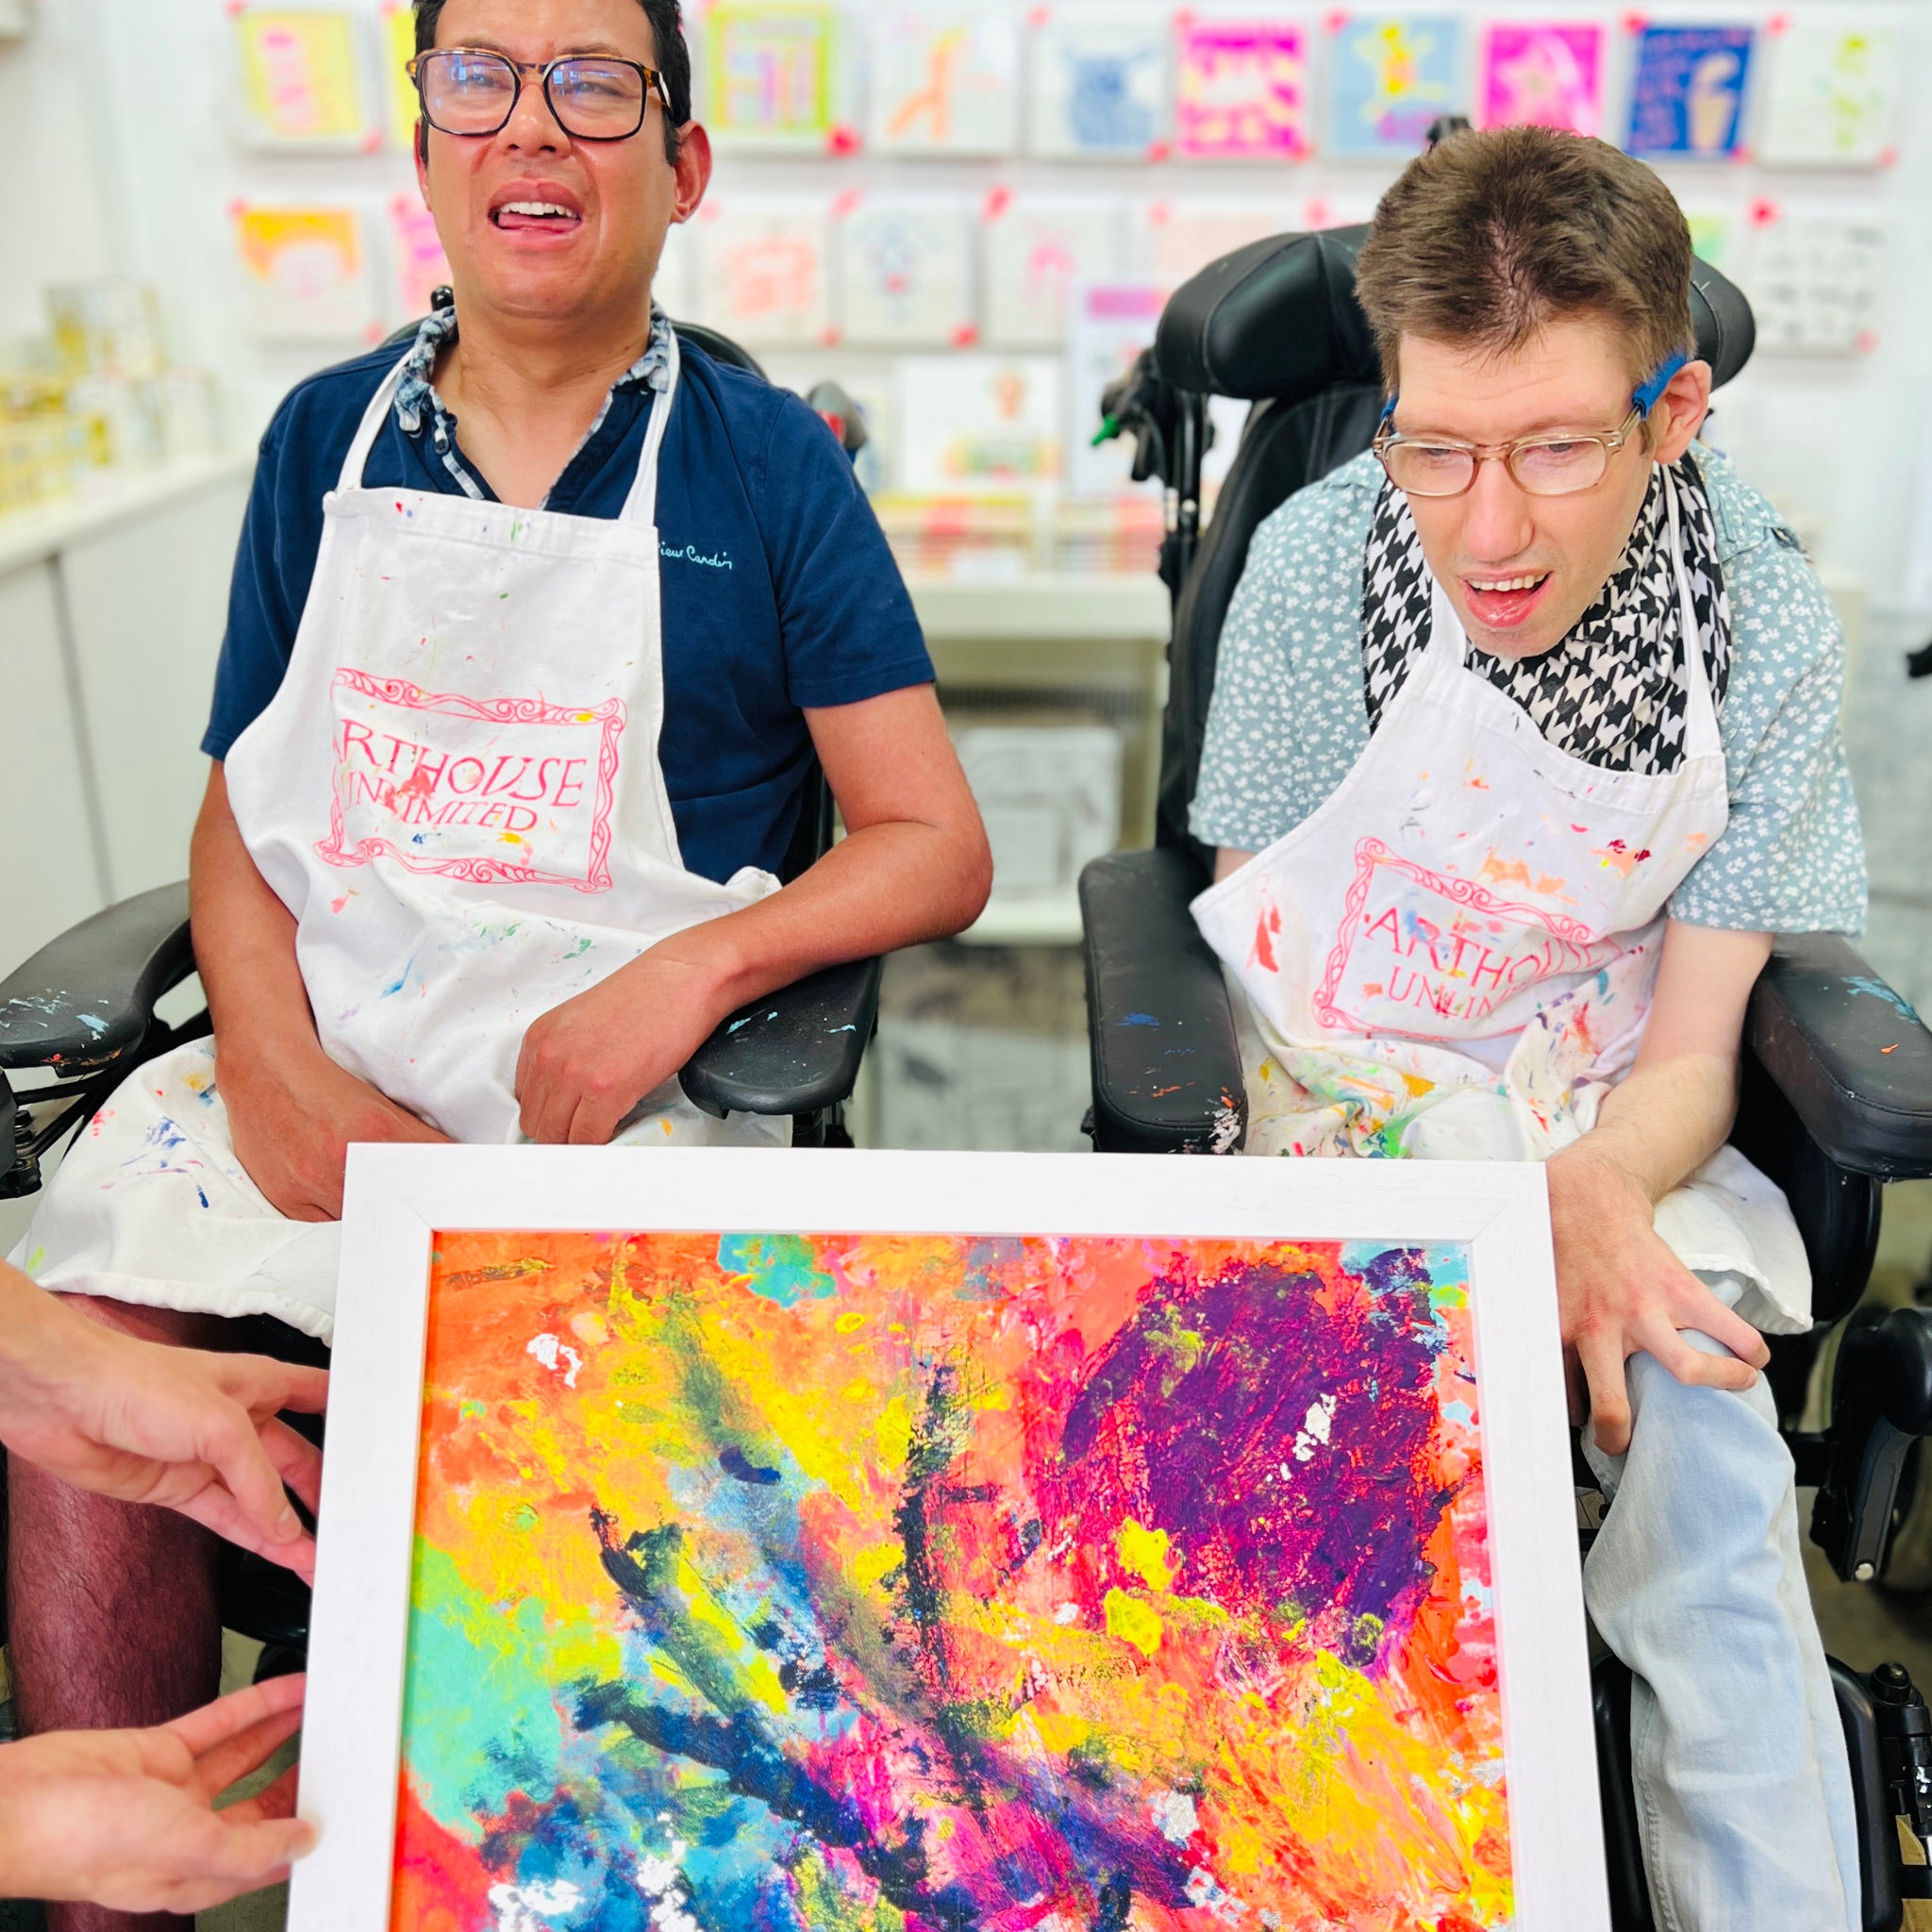 Two male artists holding Framed bright coloured abstract artwork called Sunset in the Clouds